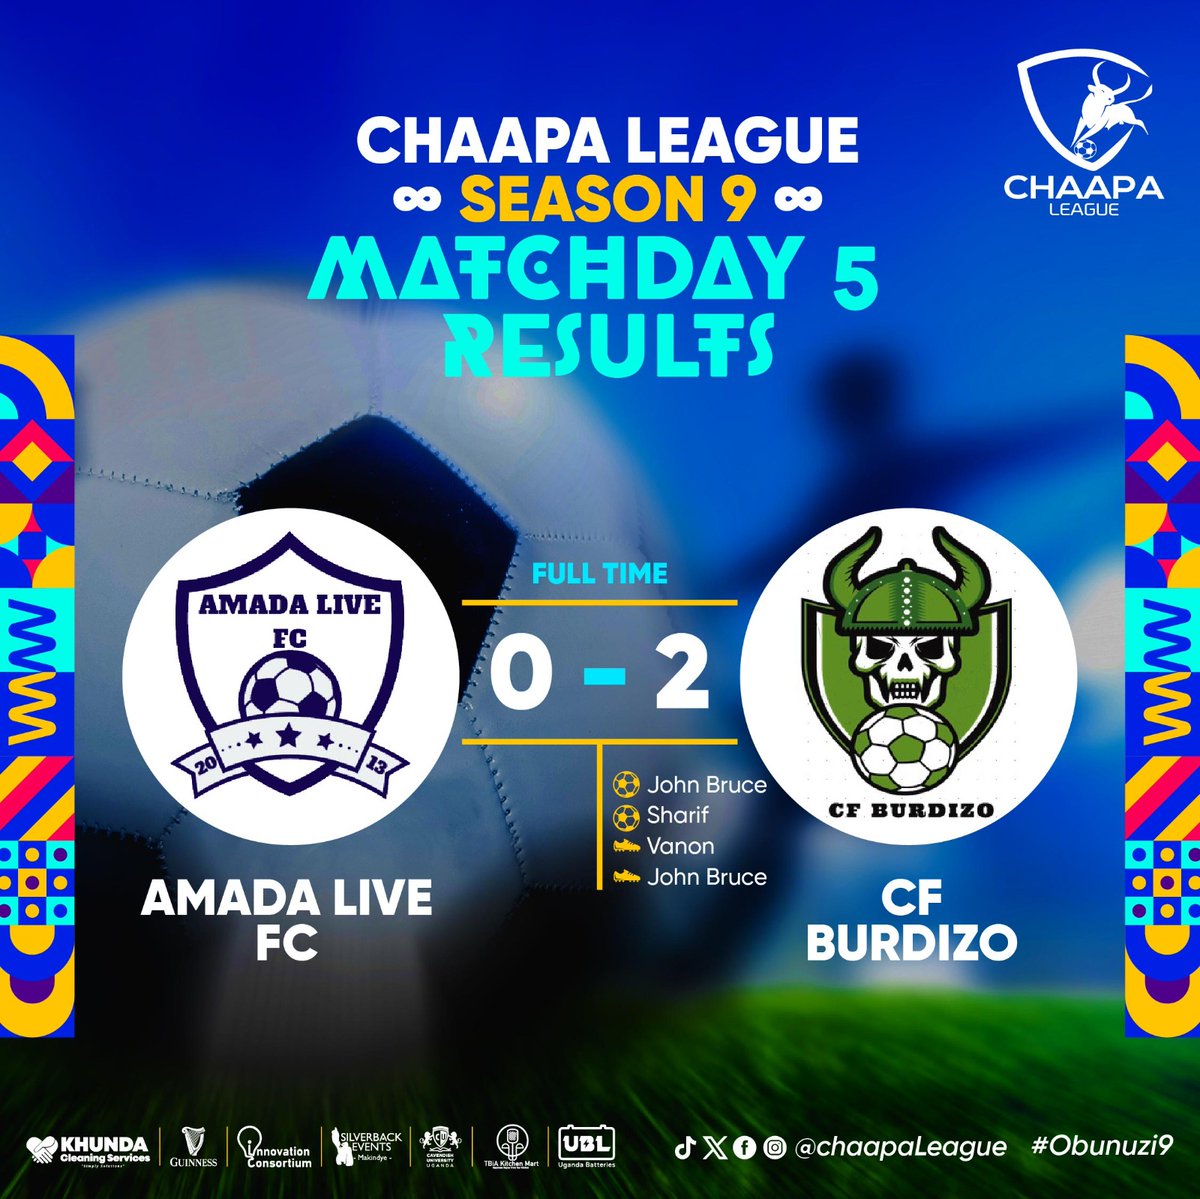 The Rubber Bullets of @Yoboyobo2006 thrashed @FunFC_Official , @Club95chaapaLge brushed @TibzFT aside, @Ruharofc scored a goal while @08Burdizo stormed clear! #Obunuzi9 #Chaapaleague9